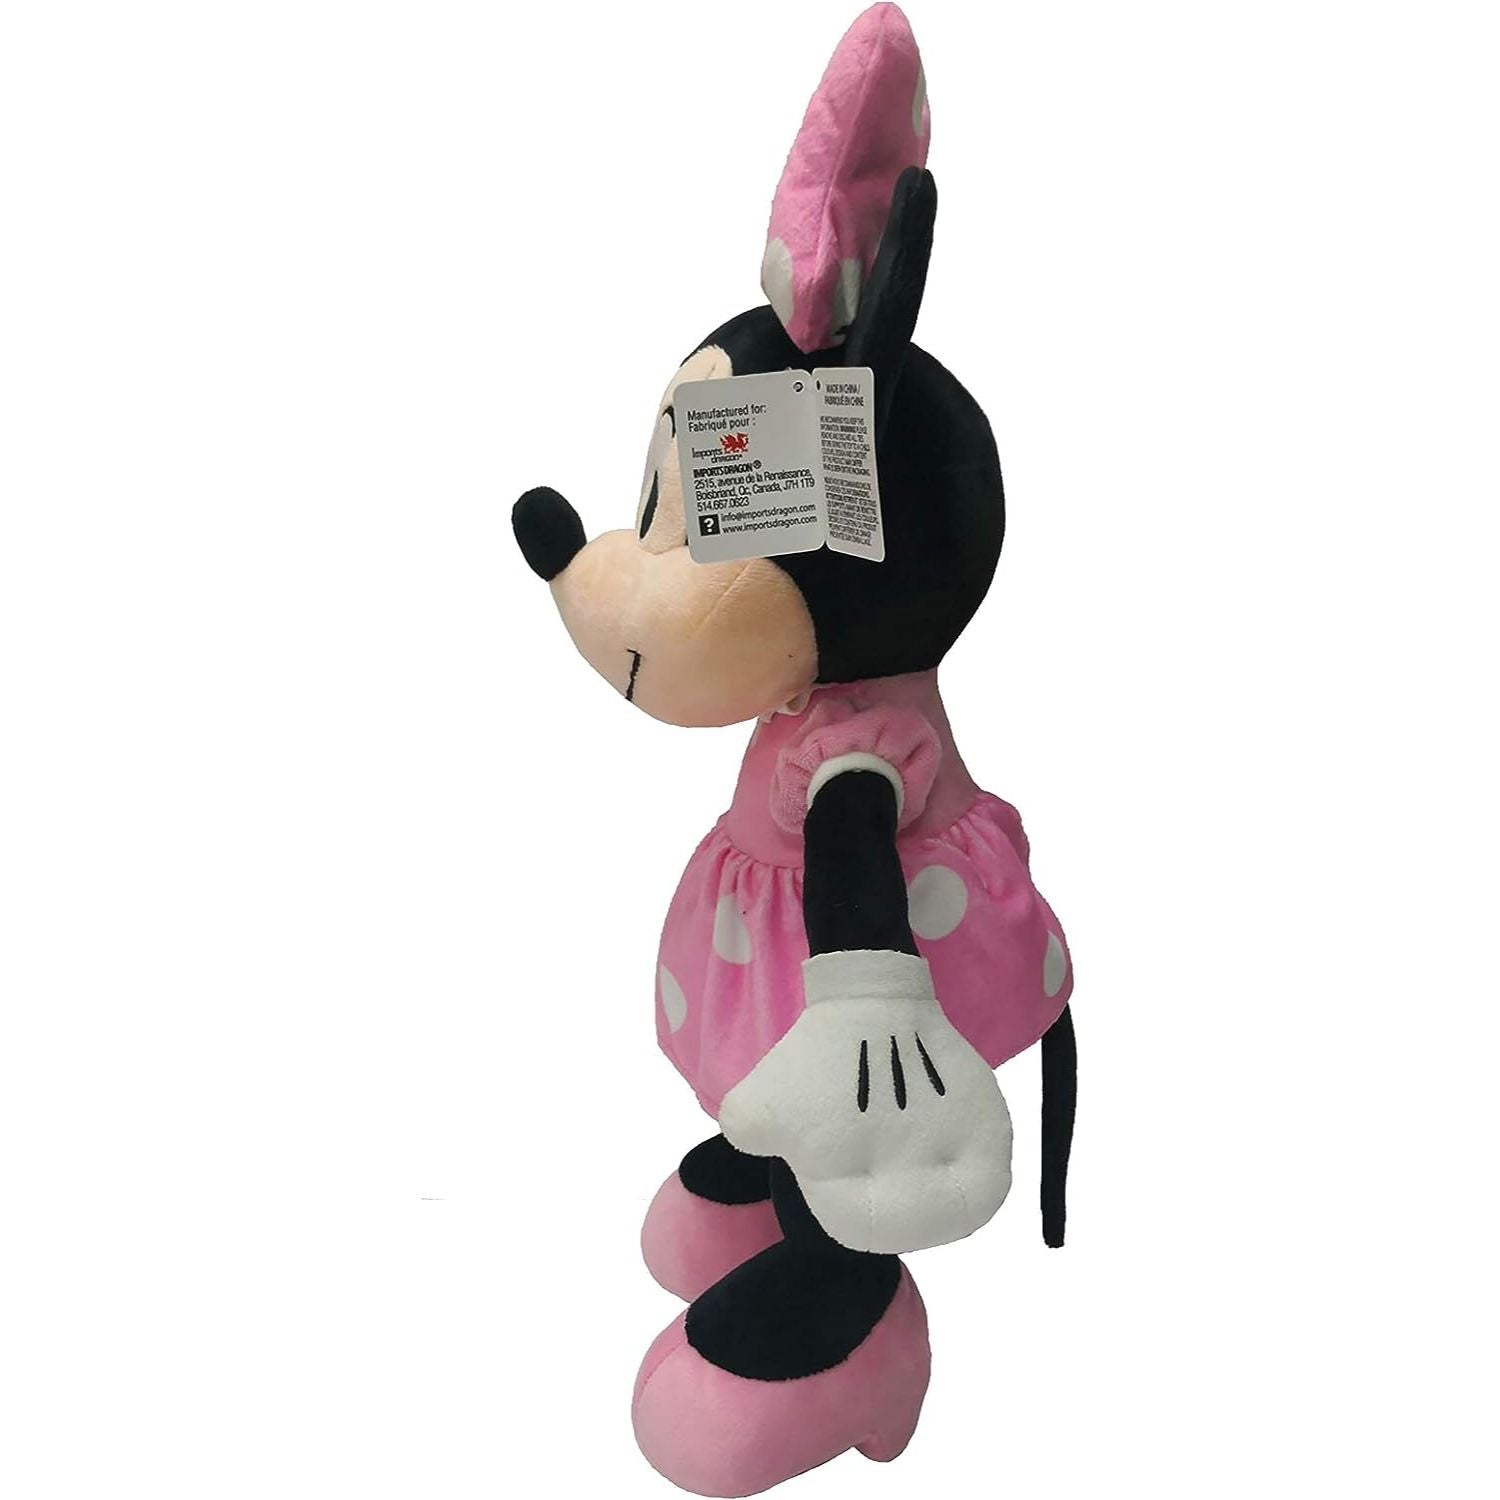 Disney Minnie mouse Left side view with label - Heretoserveyou